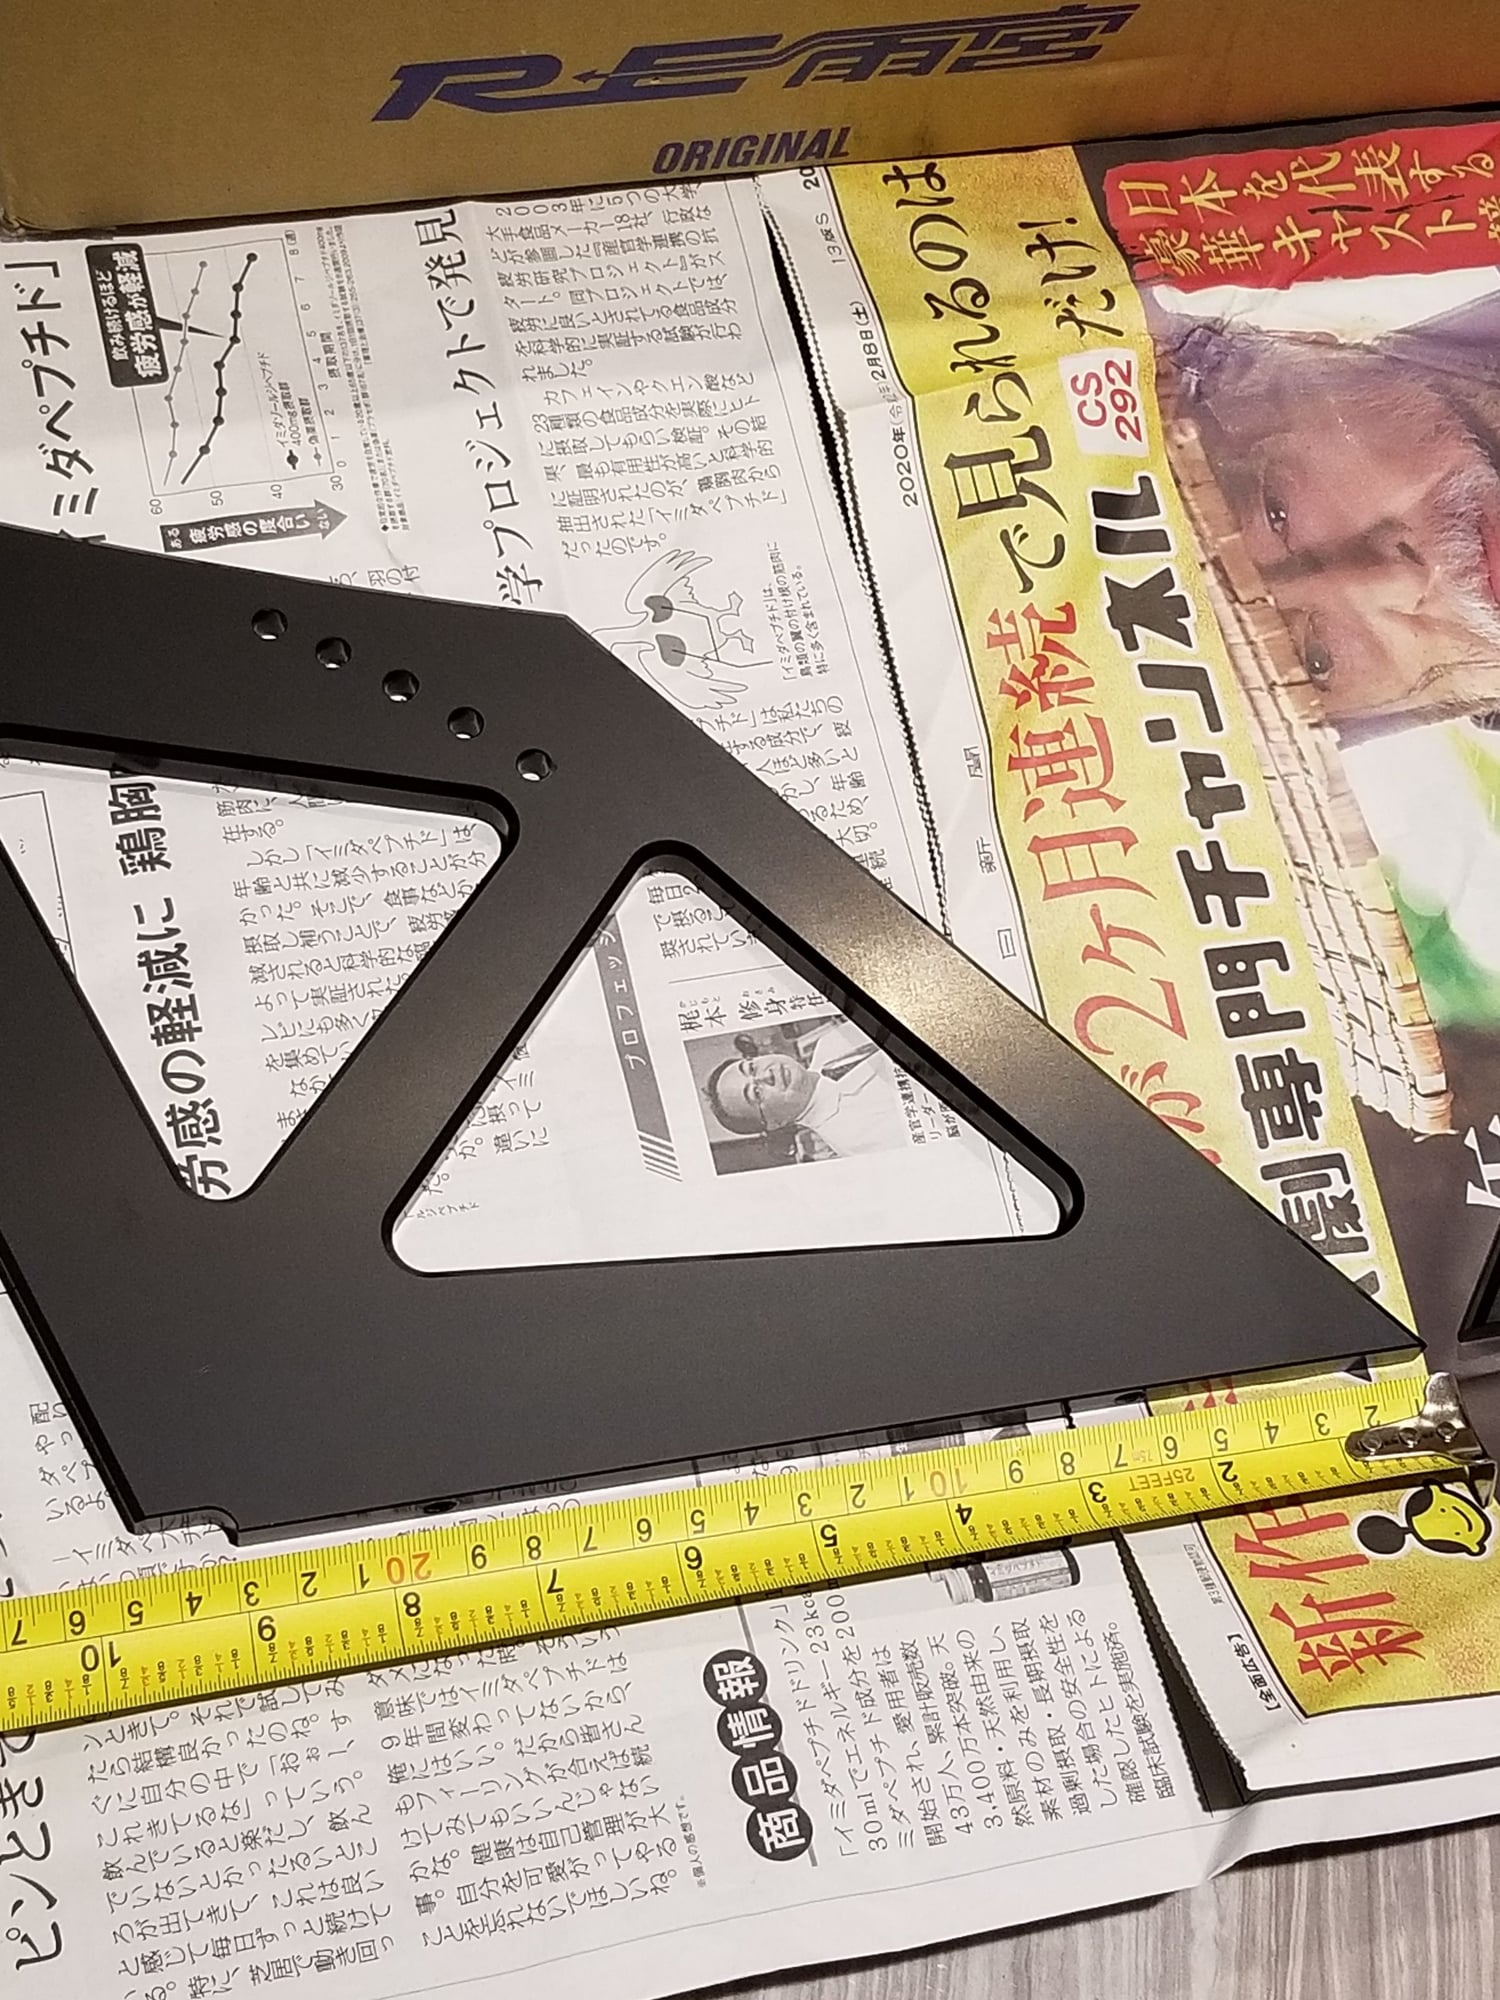 Exterior Body Parts - FD3S RE-Amemiya GT-II Rear Wing Spoiler Black Forged Aluminum Mount Stays JDM - New - 1993 to 2002 Mazda RX-7 - Toronto, ON M9A3G2, Canada